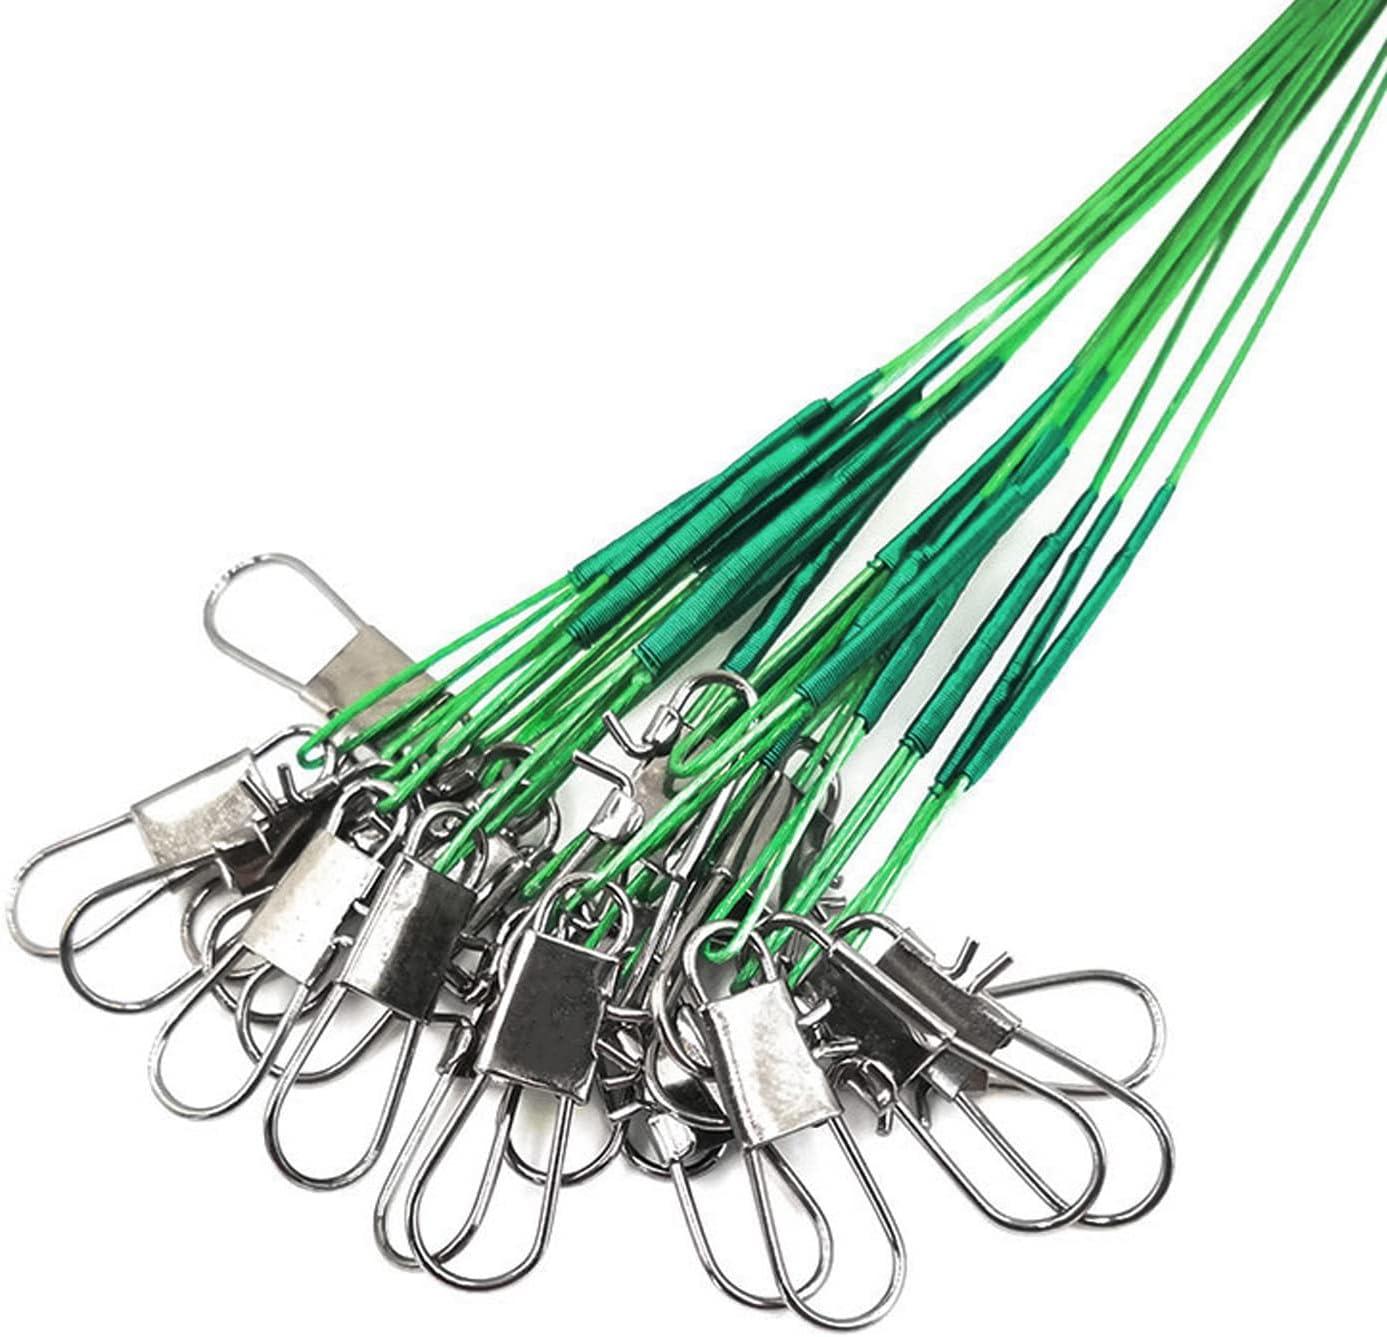  KINBOM 60pcs Fishing Tackle Leaders, Stainless